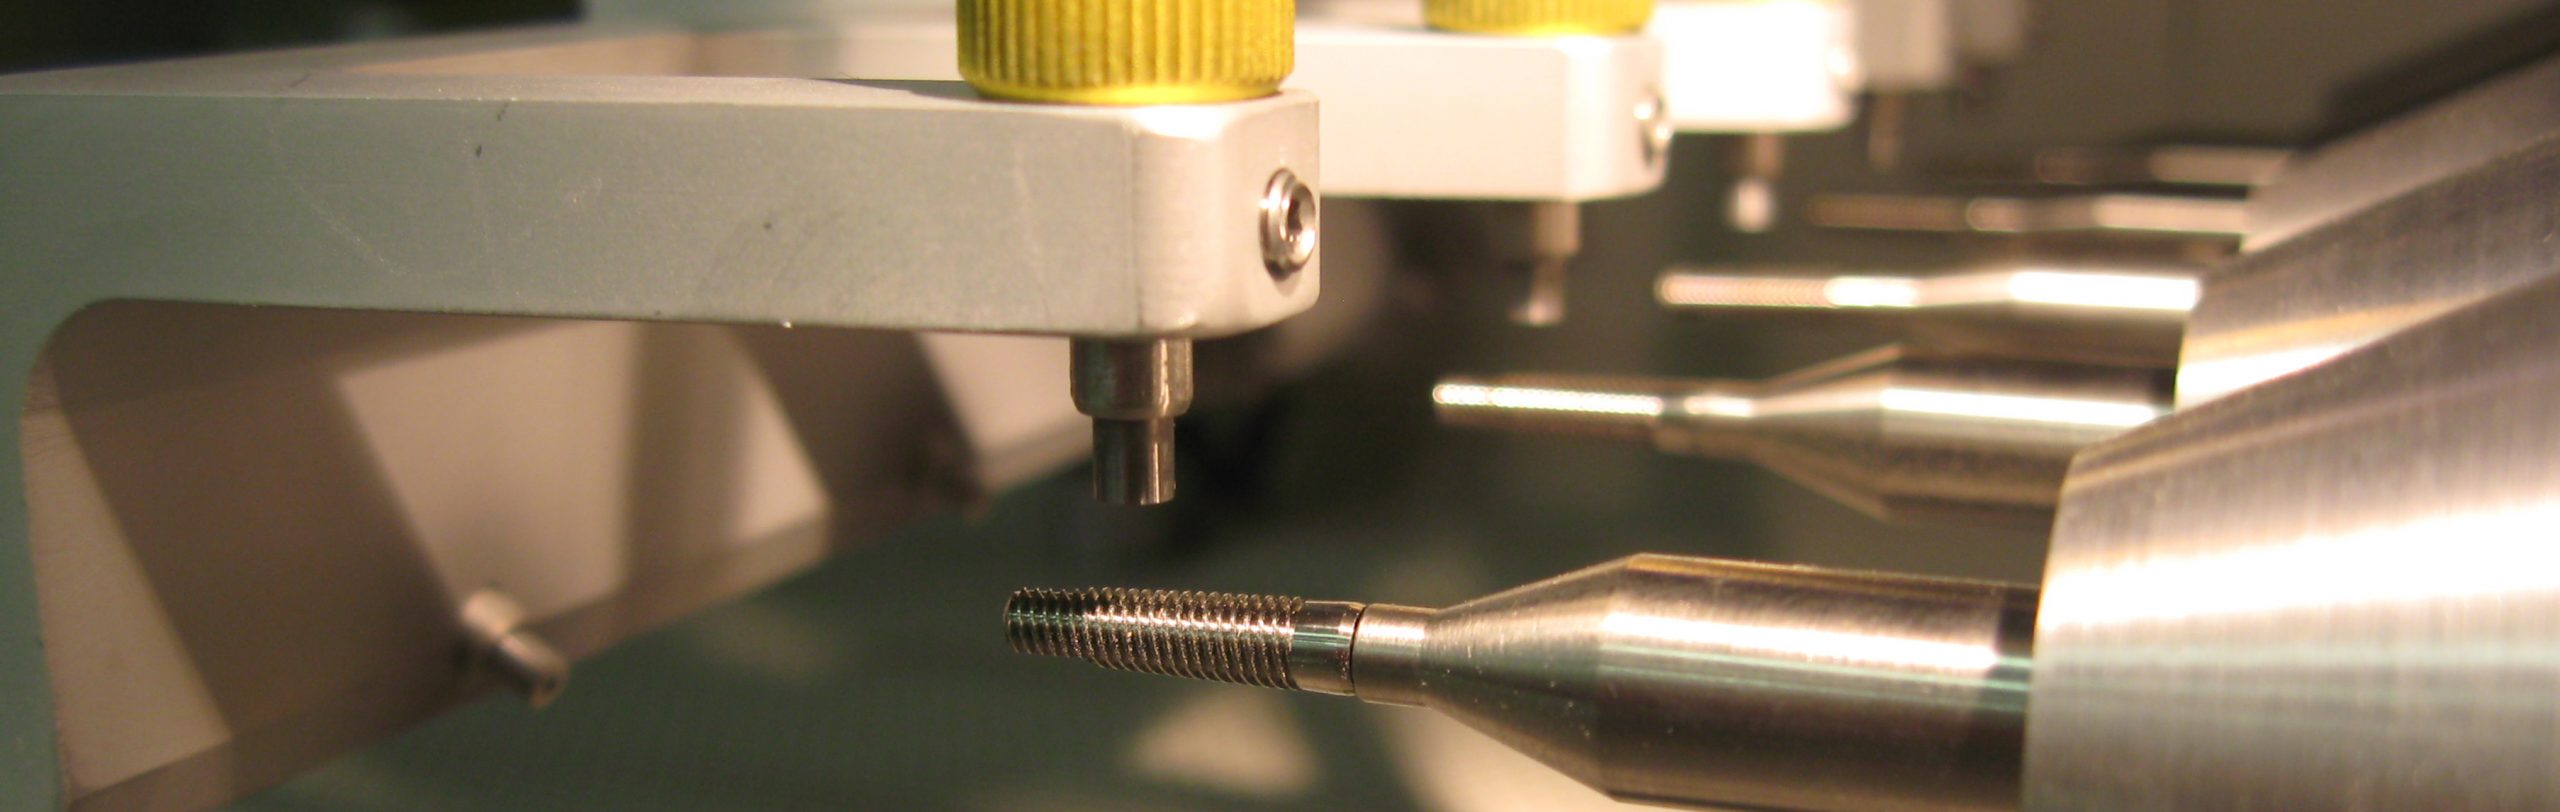 Dental implants being textured in Comco's Advanced Lathe MicroBlasting System